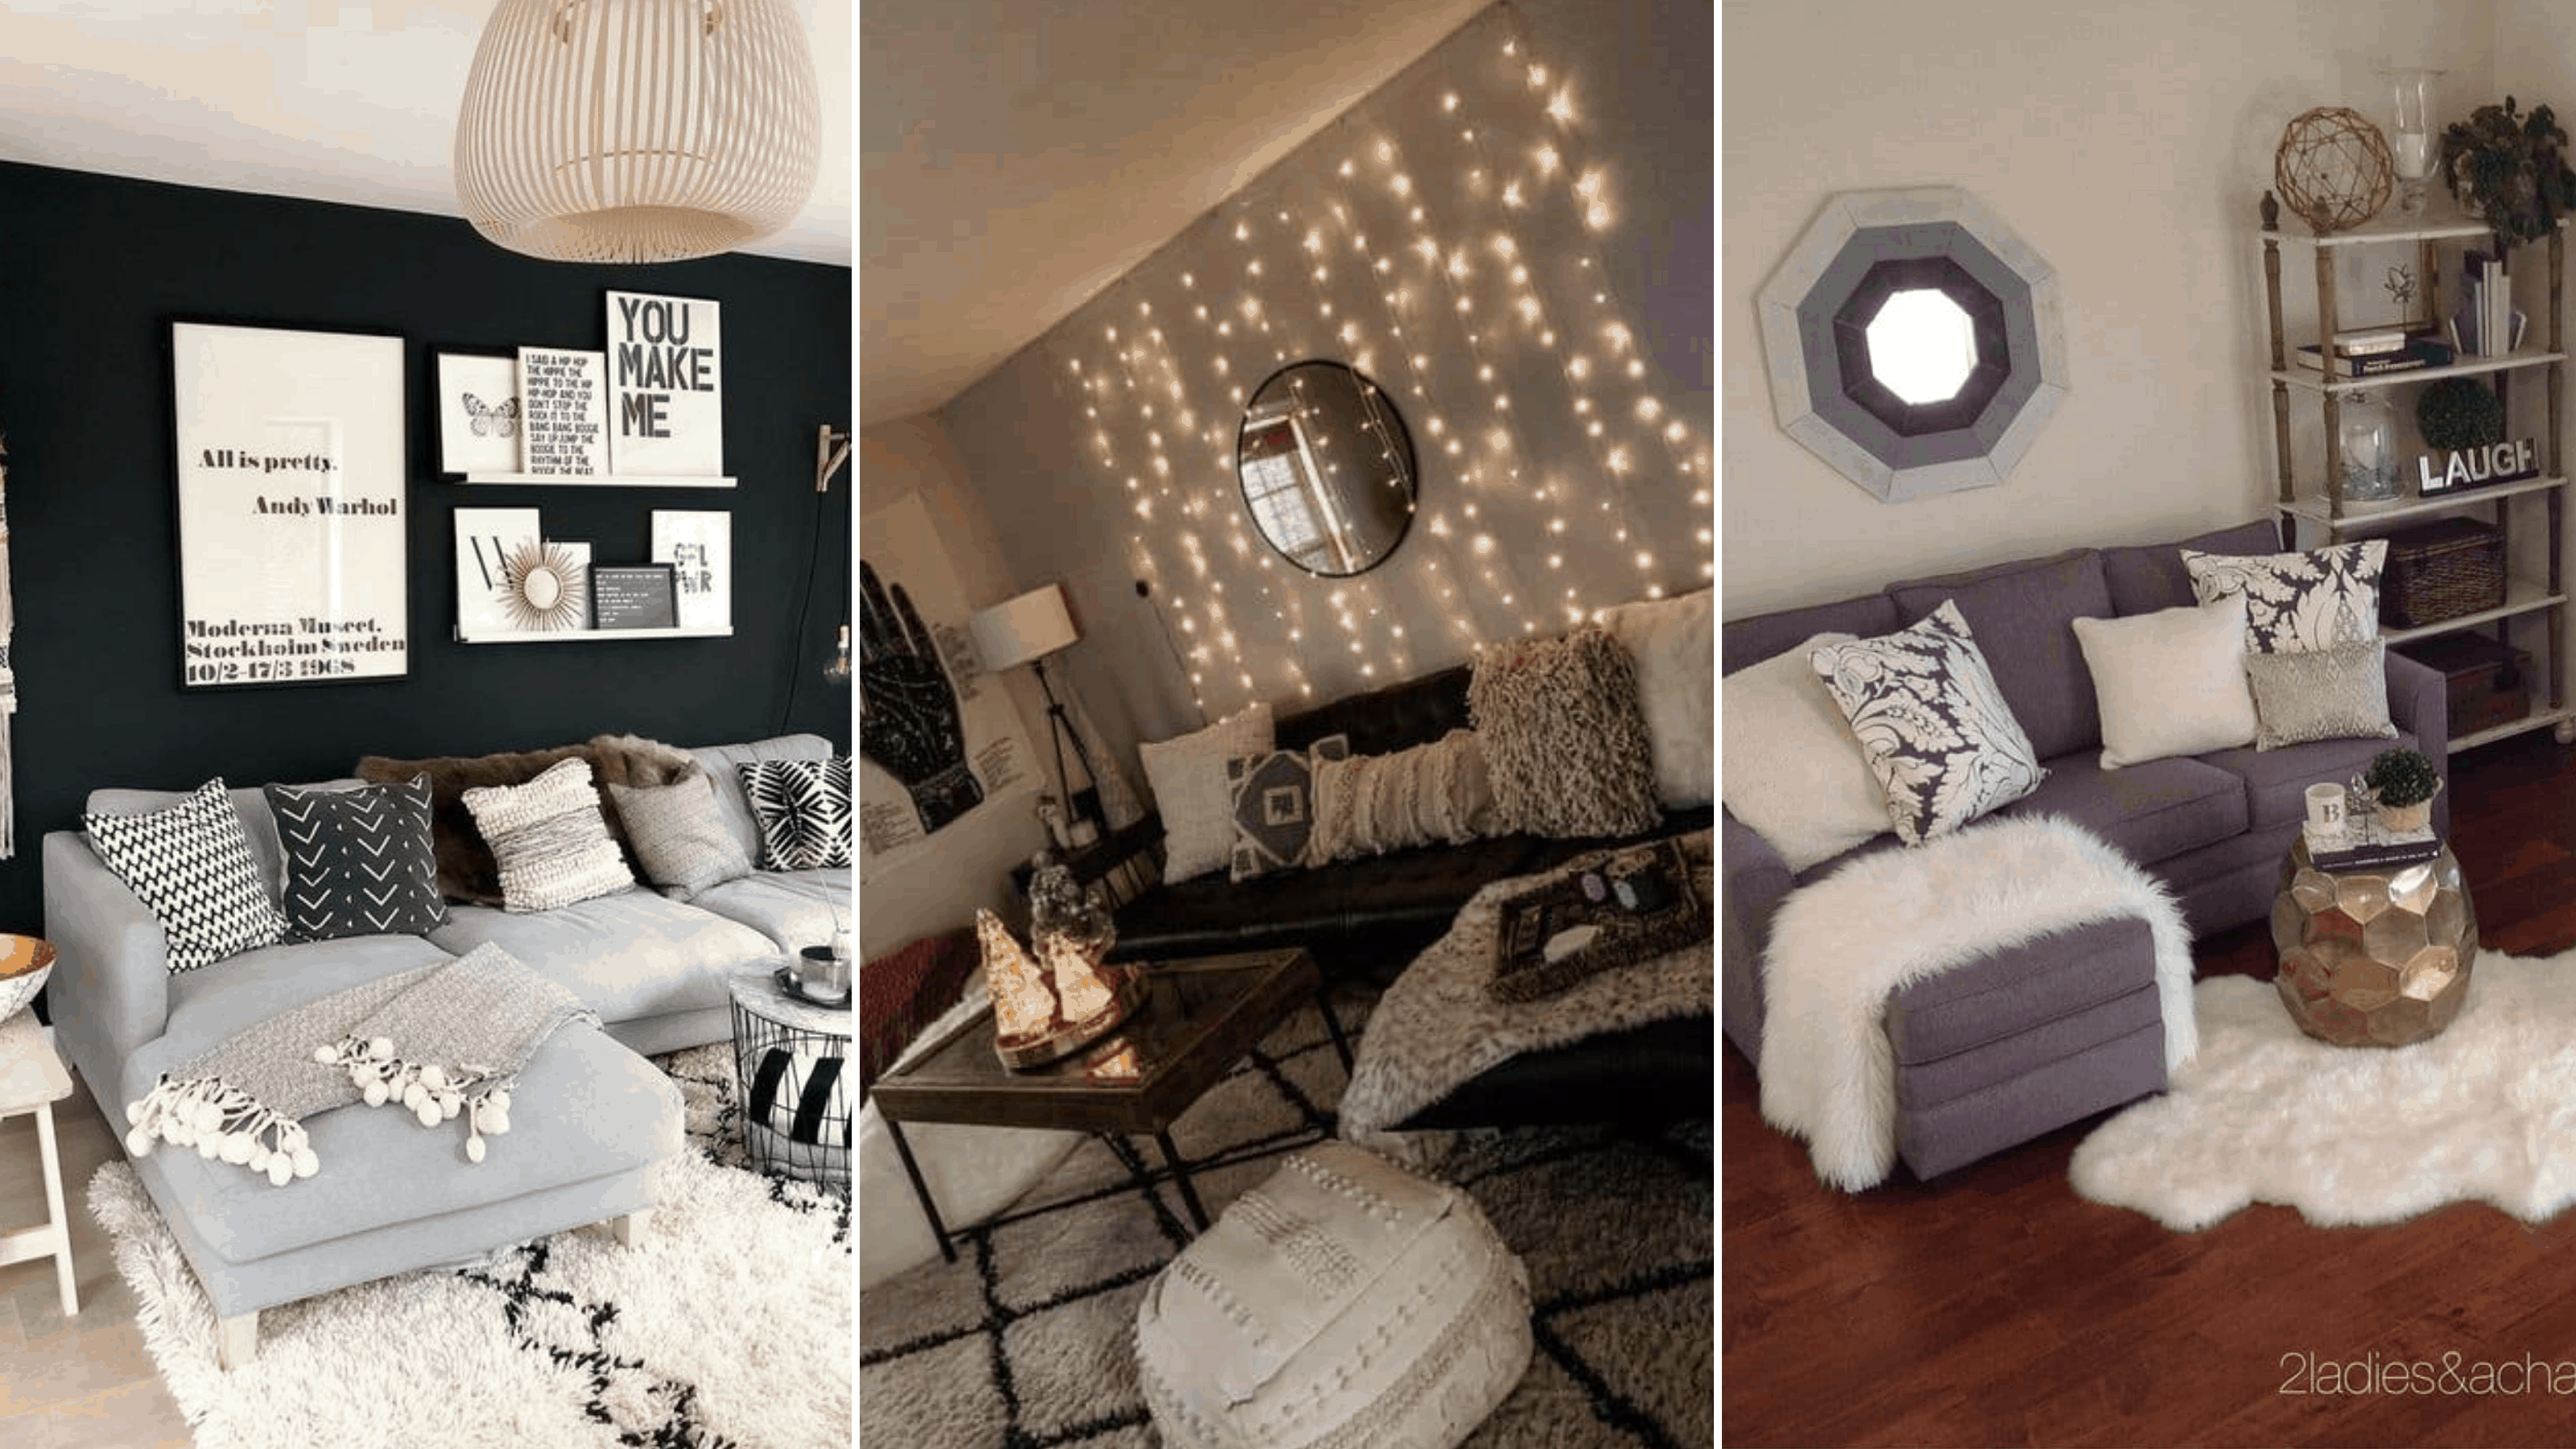 24 Genius College Apartment Decorating Ideas On A Budget By Sophia Lee